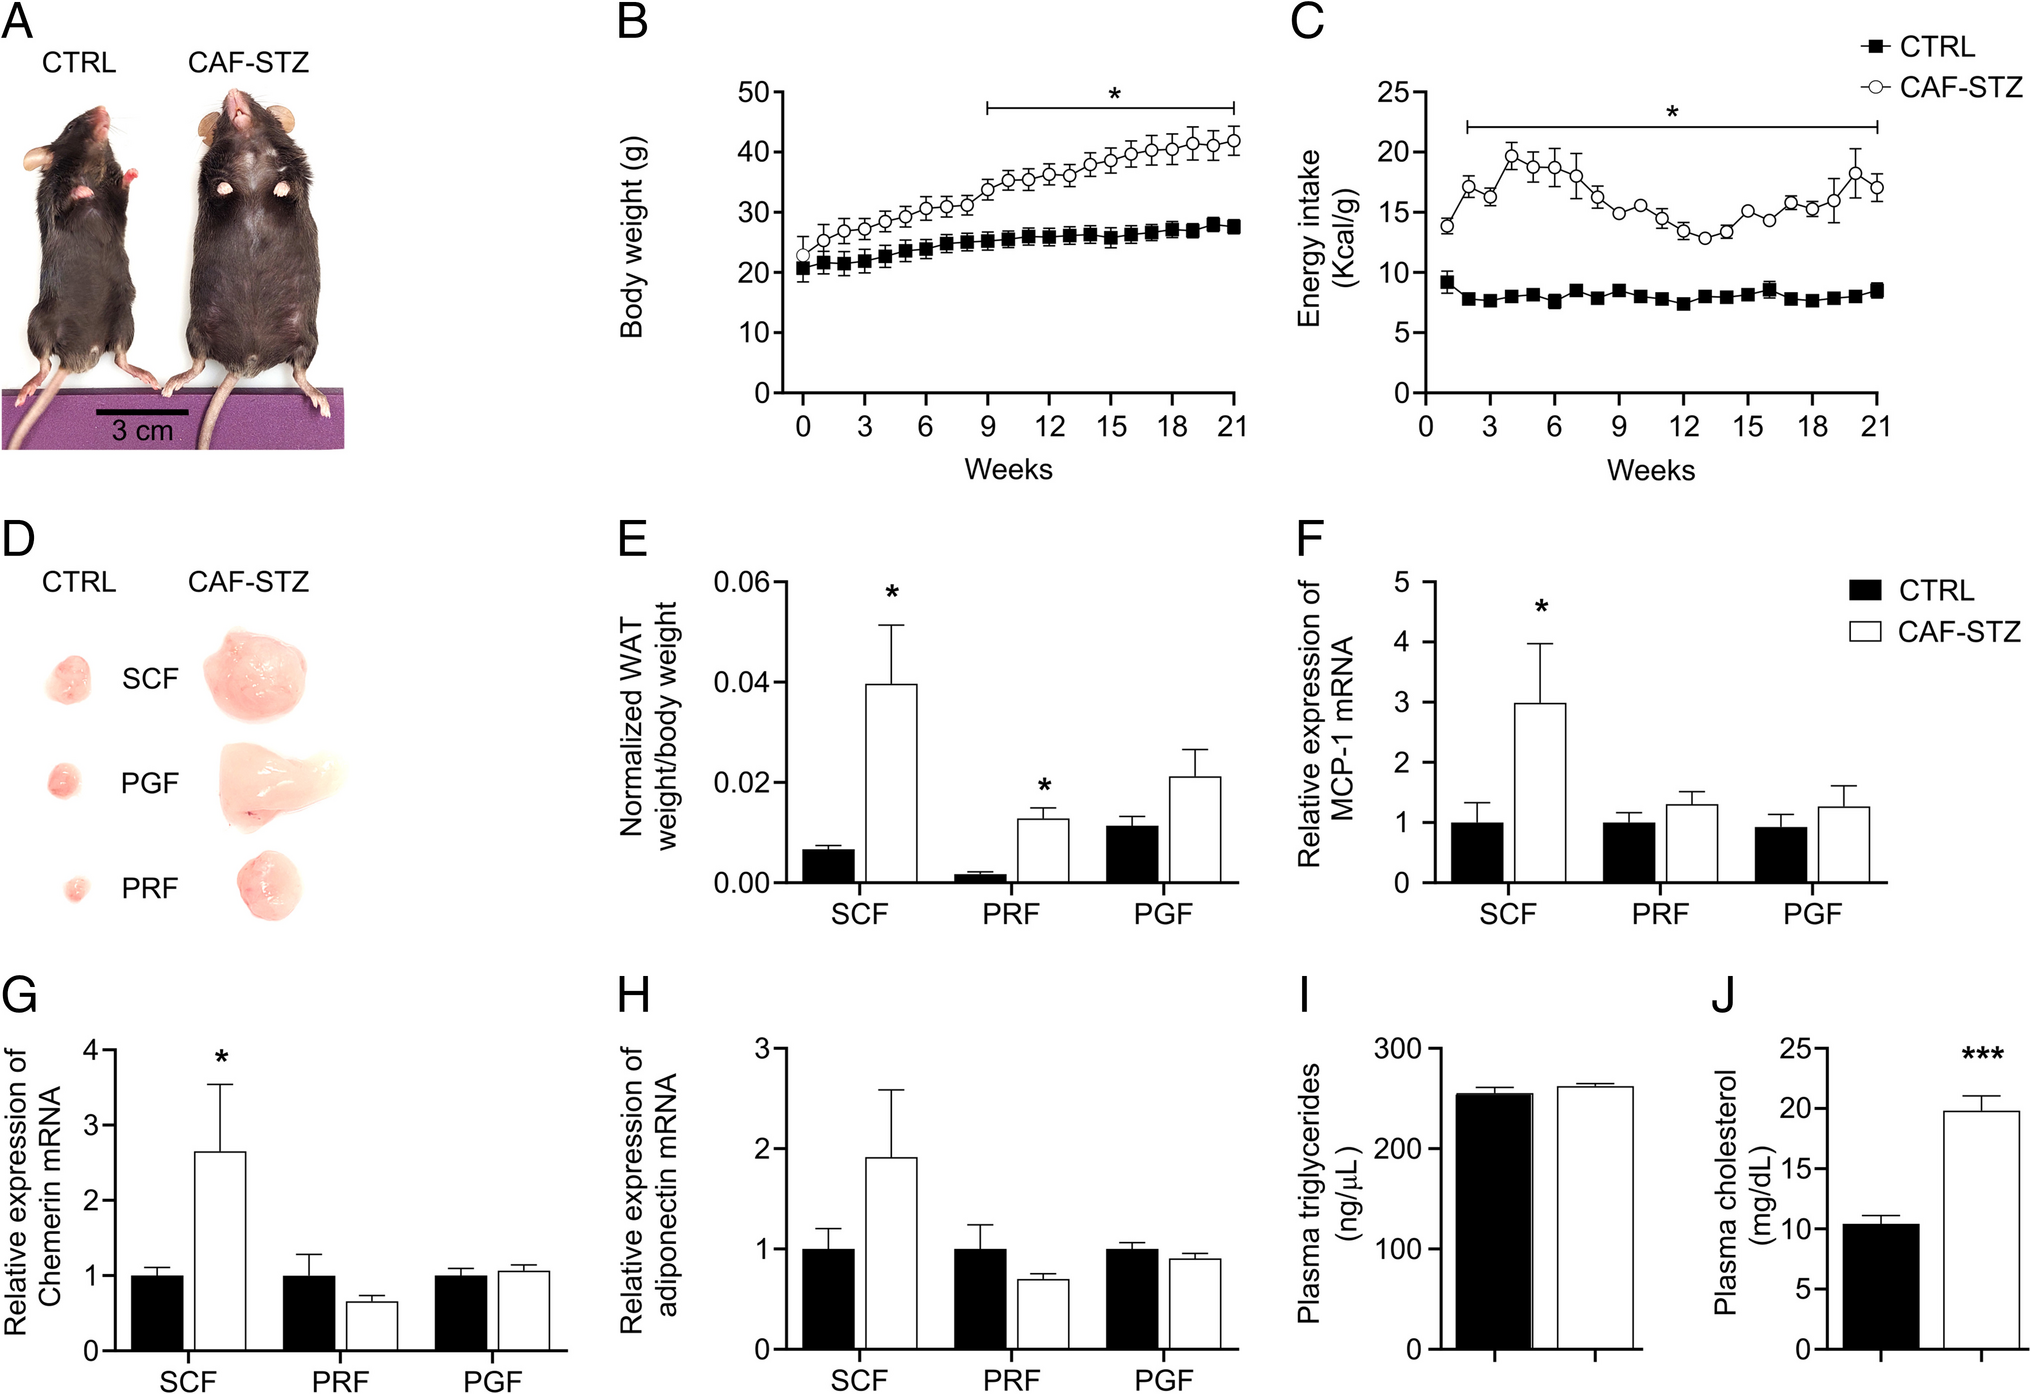 Gene expression alterations of purinergic signaling components in obesity-associated intestinal low-grade inflammation in type 2 diabetes